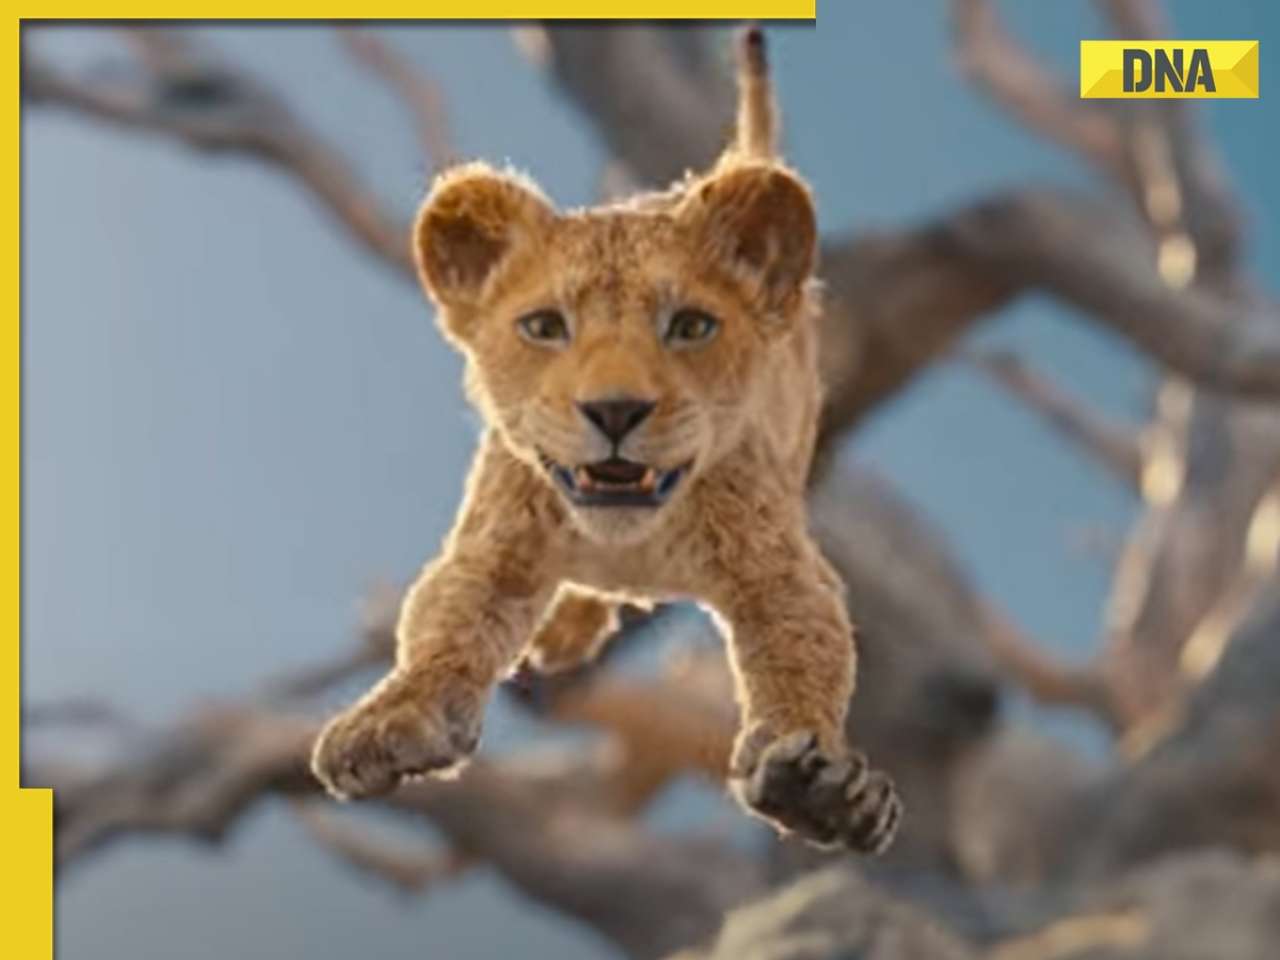 Mufasa The Lion King trailer: Disney prequel shows how Simba's father rose to power, fans say 'Oscar loading'